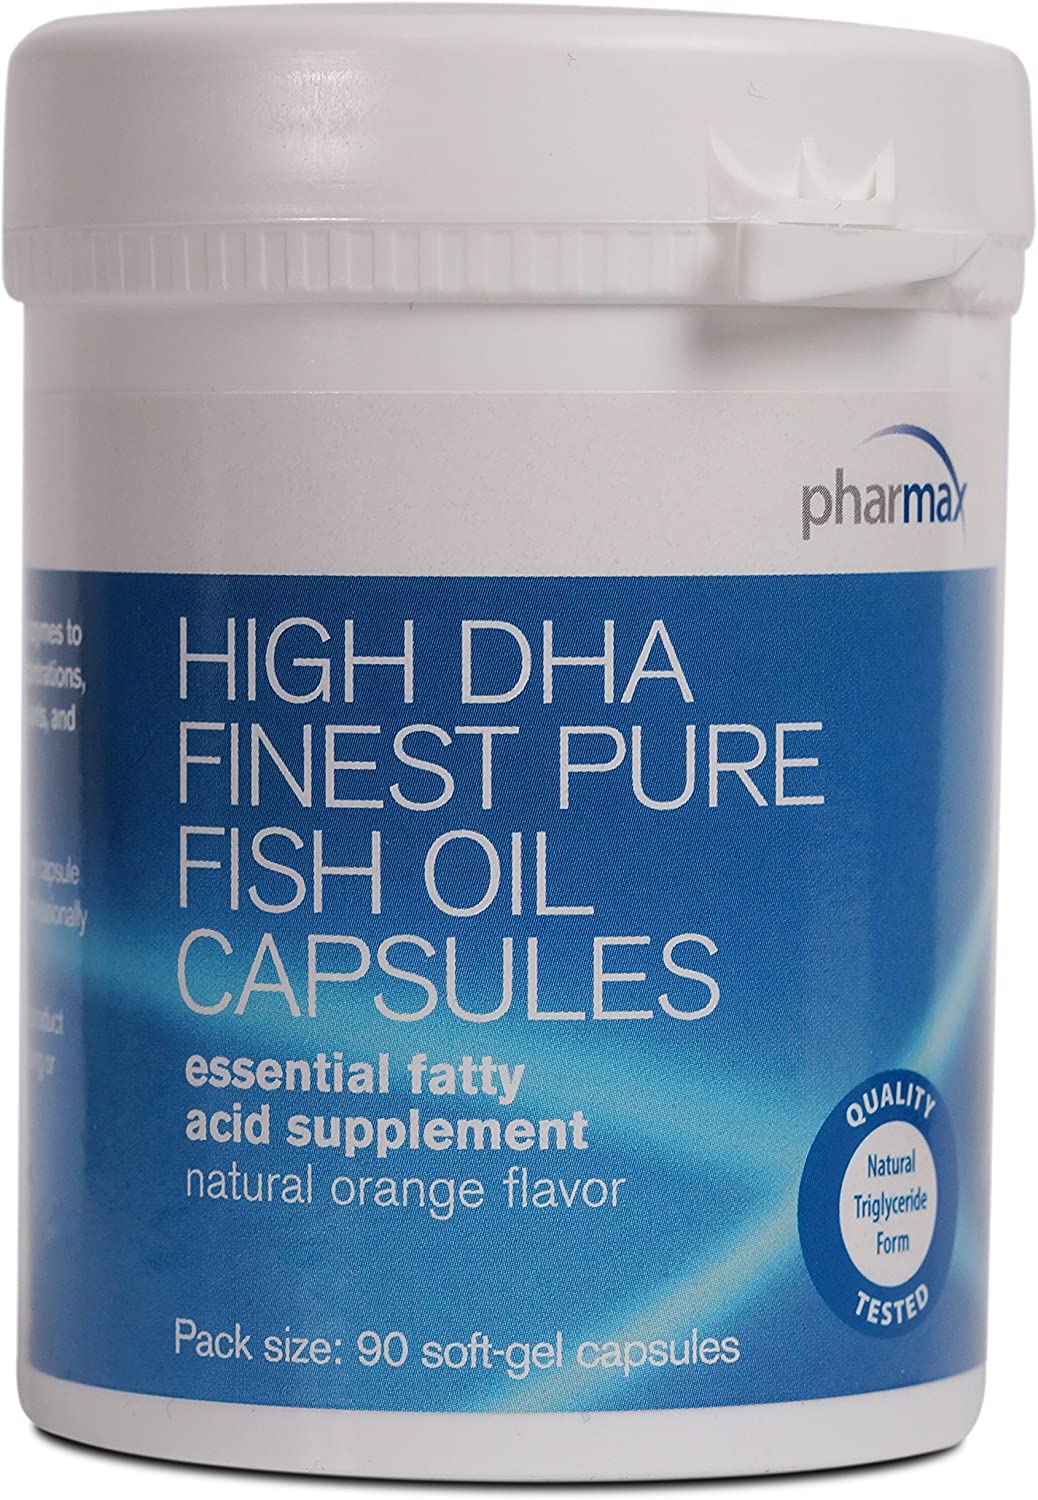 High DHA Finest Pure Fish Oil Caps